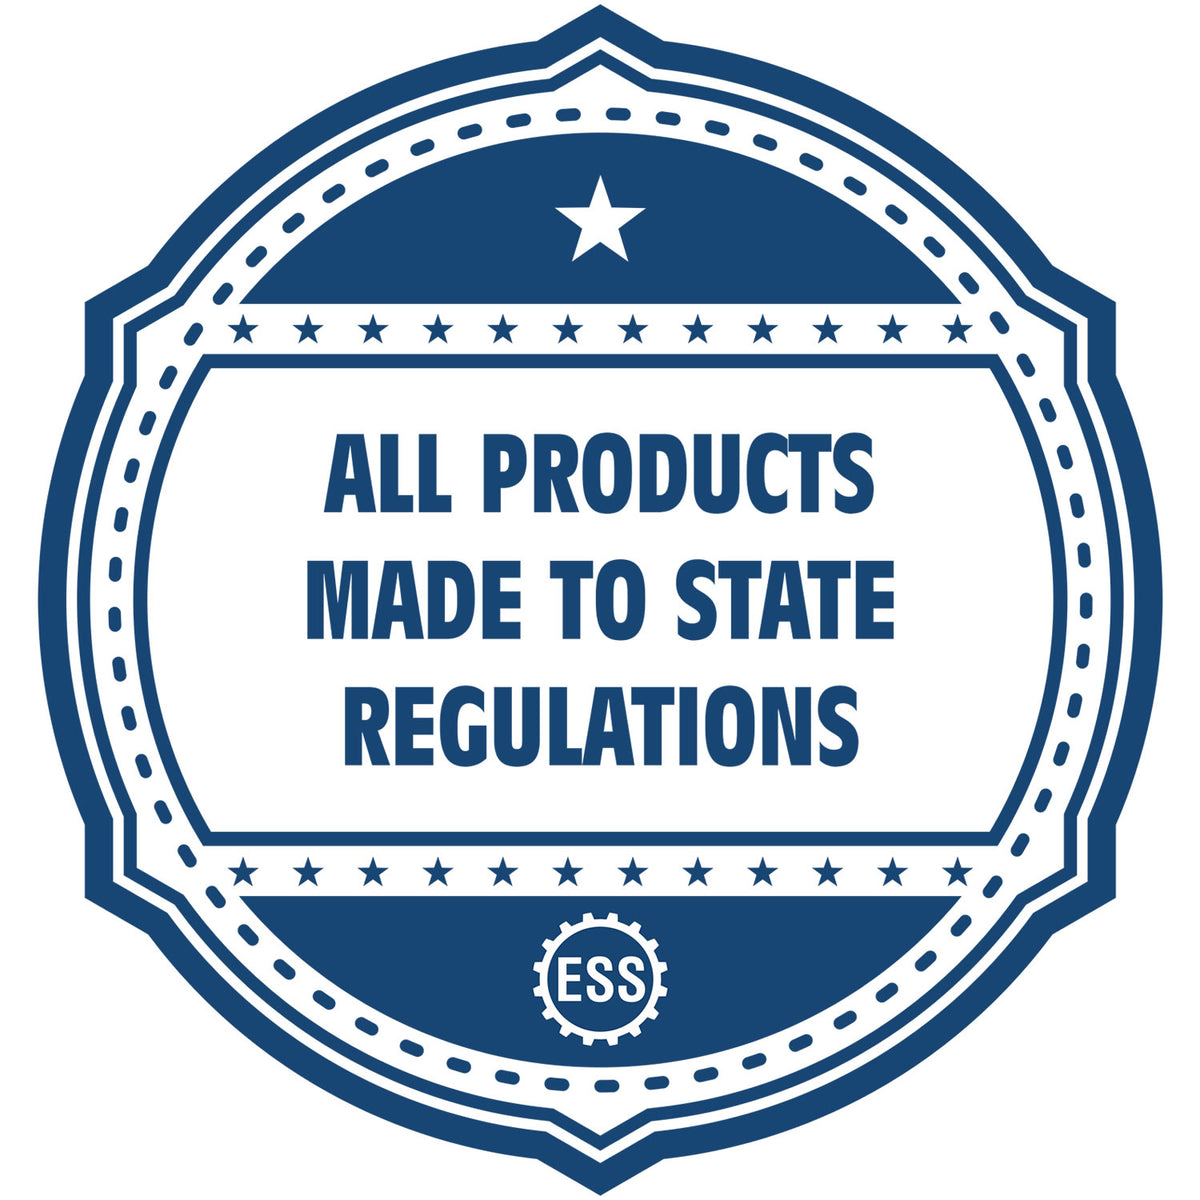 An icon or badge element for the State of Maryland Extended Long Reach Engineer Seal showing that this product is made in compliance with state regulations.